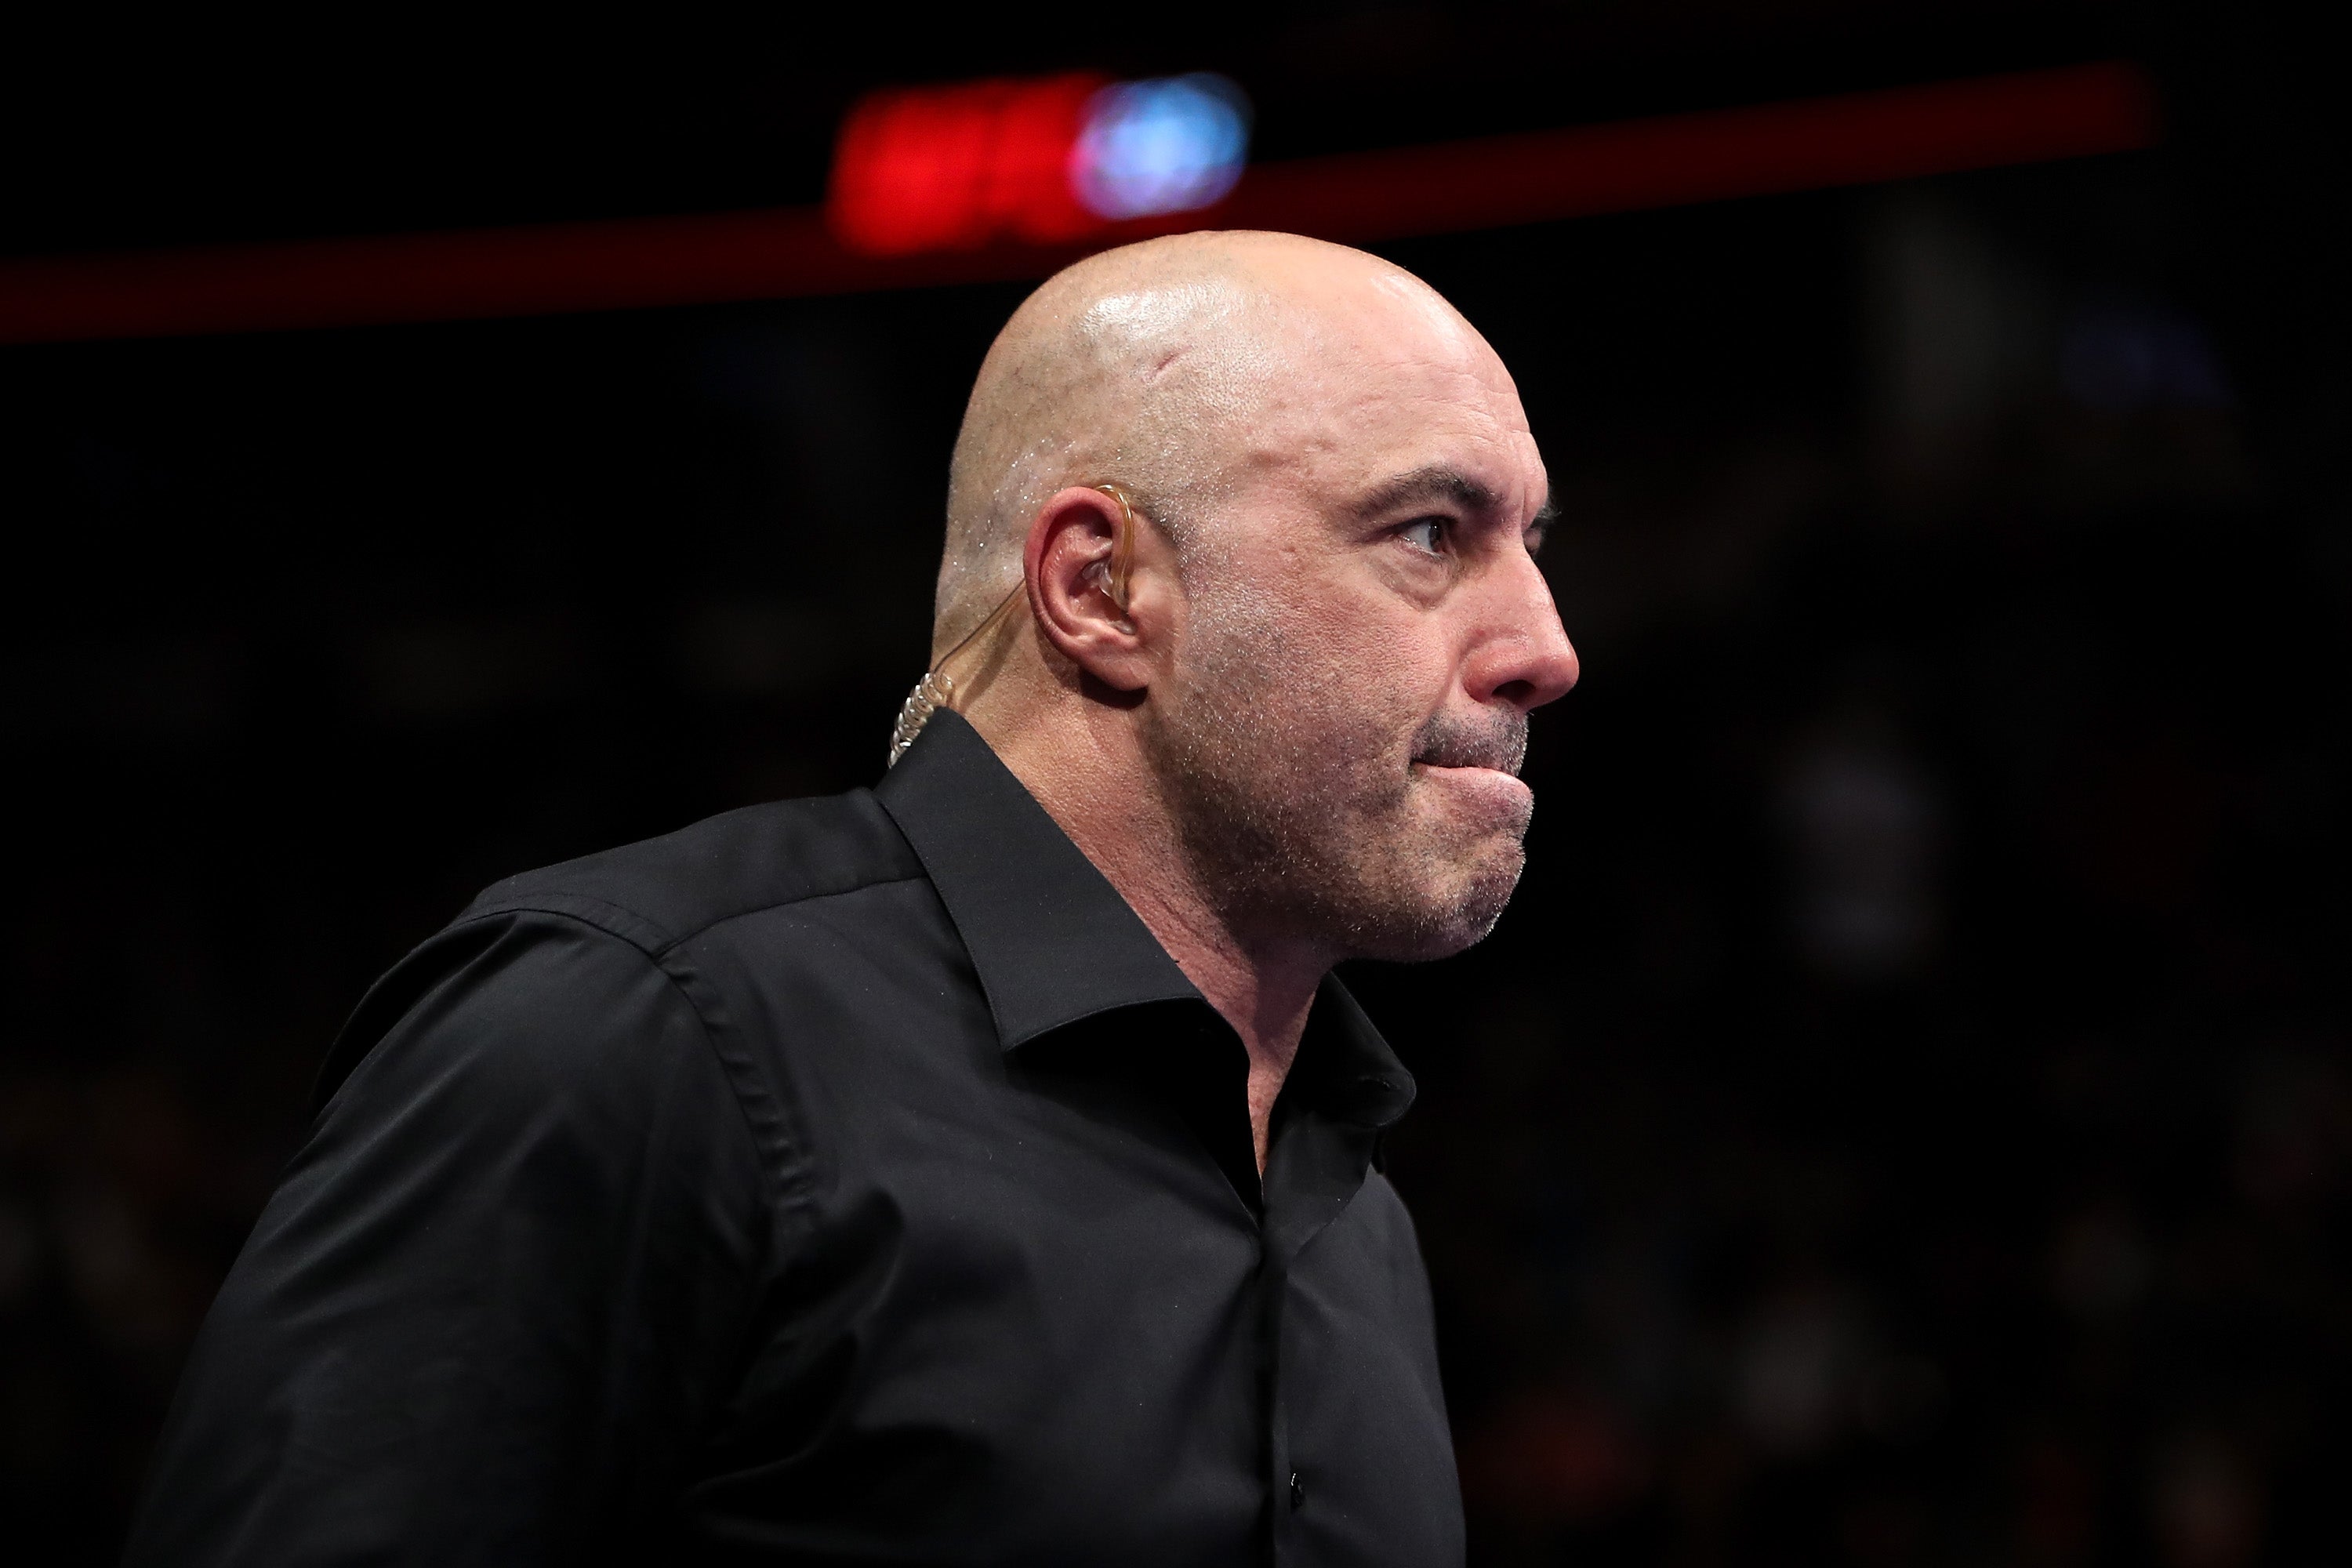 This is not the first time Joe Rogan has been at the centre of controversy